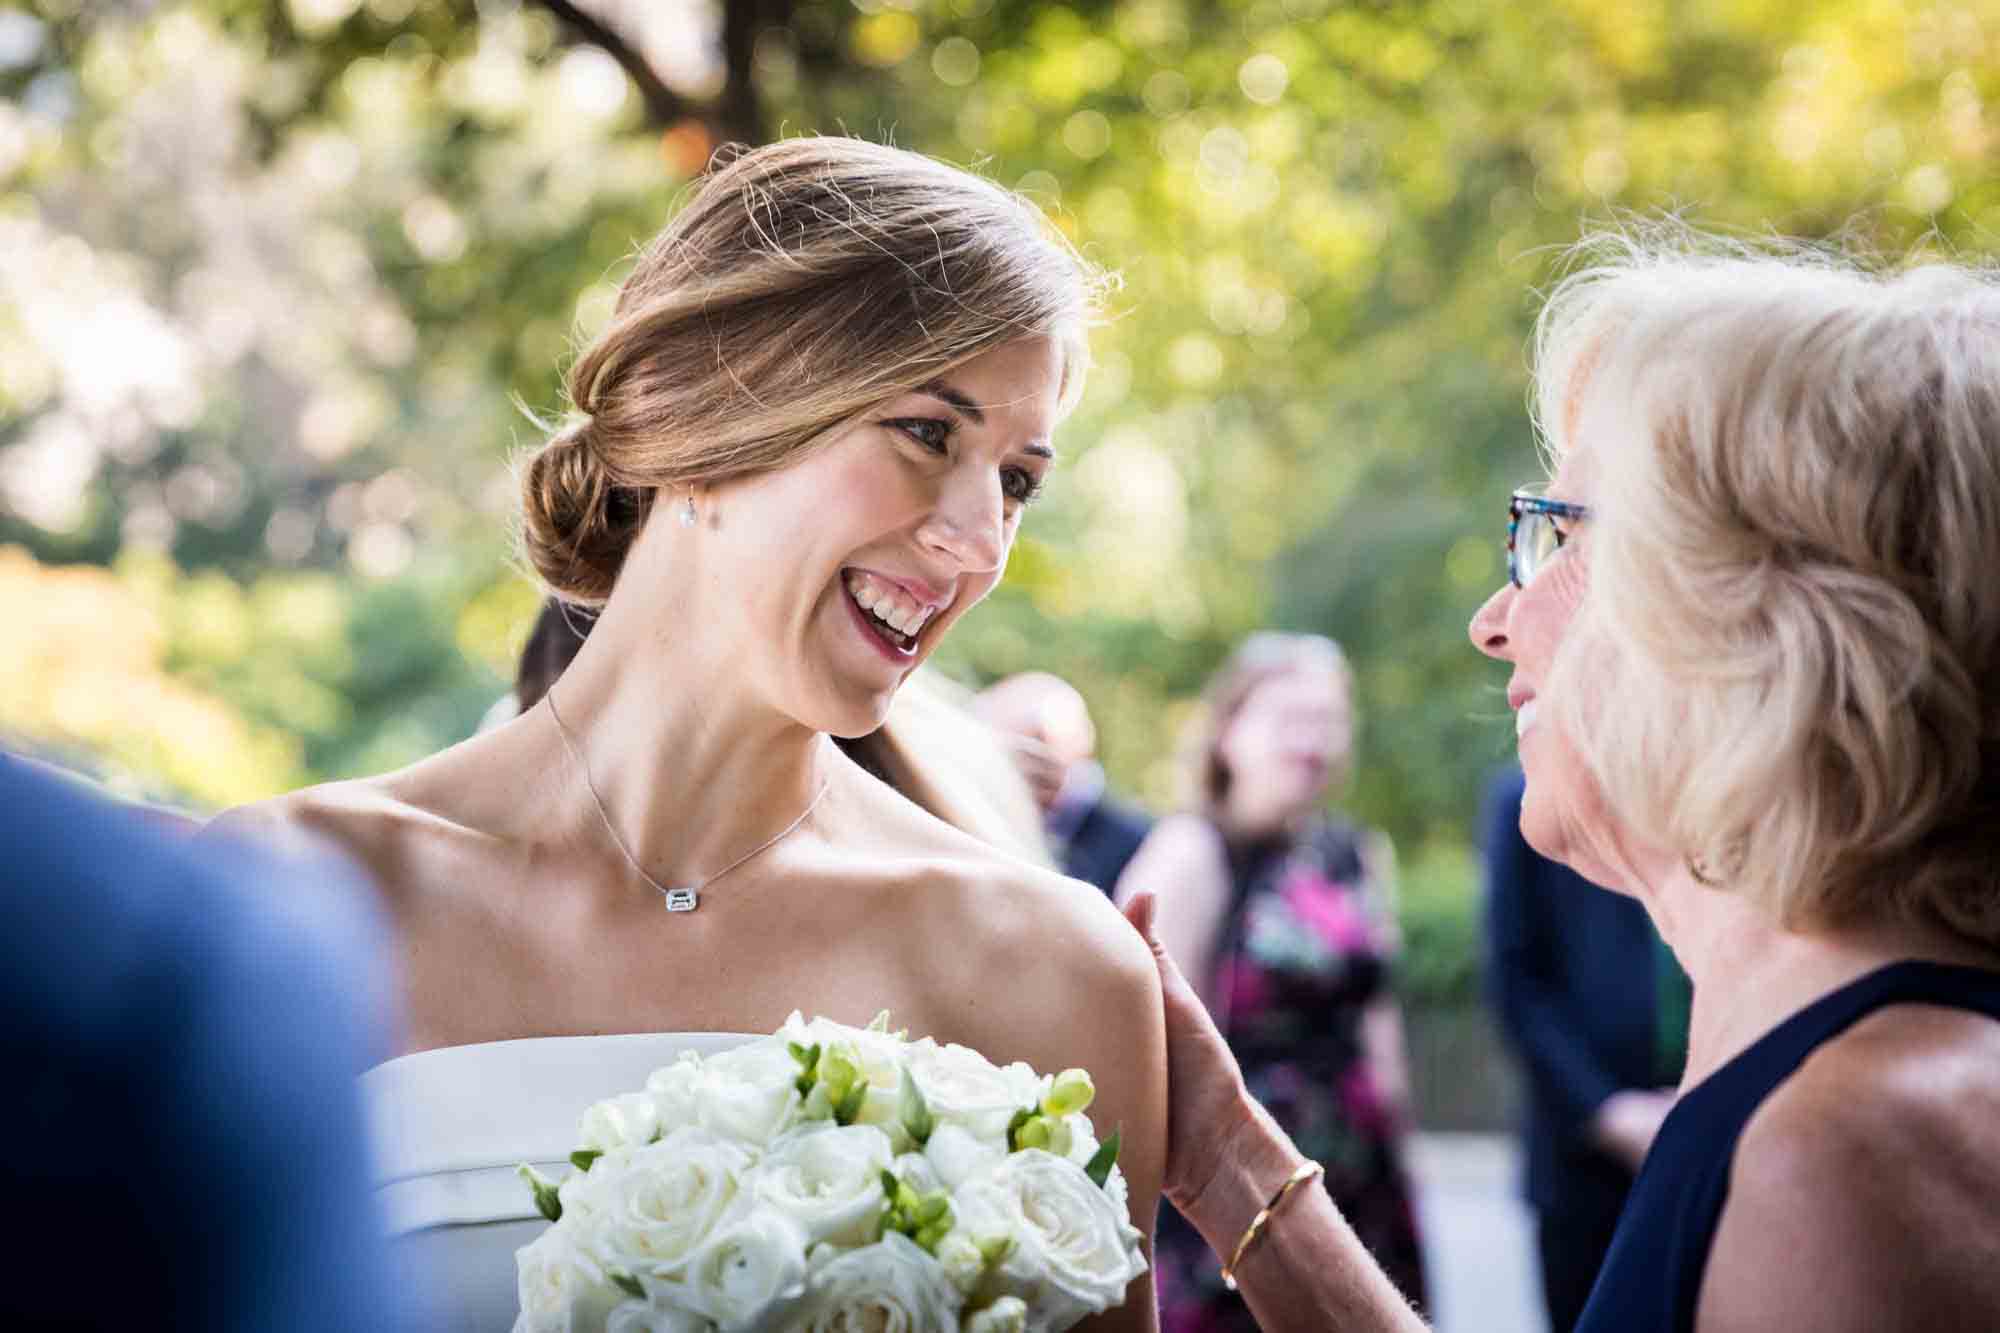 Bride holding bouquet and laughing with older guest during a Conservatory Garden wedding in Central Park